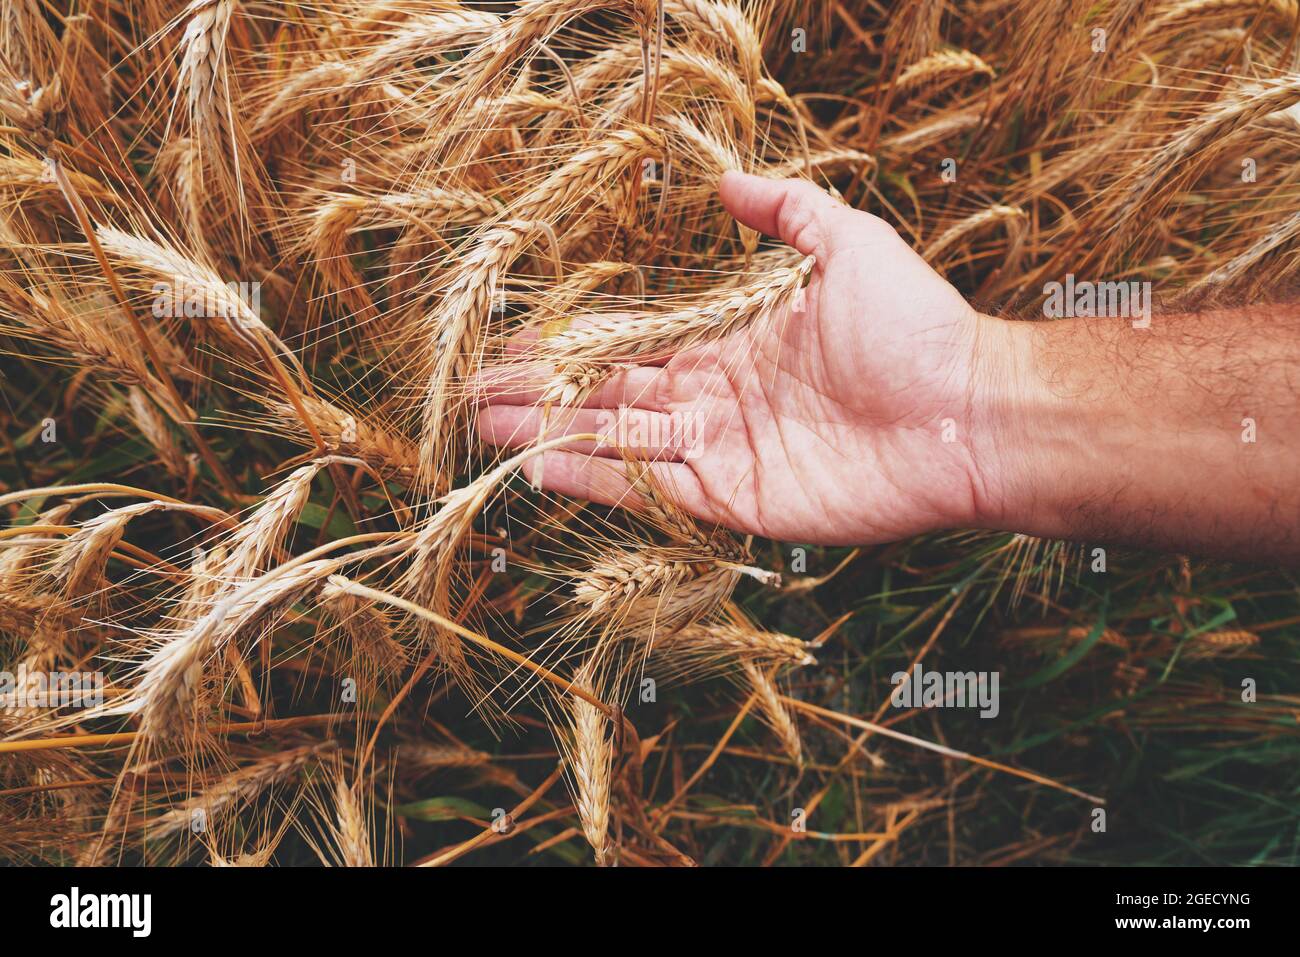 Corn Agriculture Fields for Sustainable Future Stock Photo